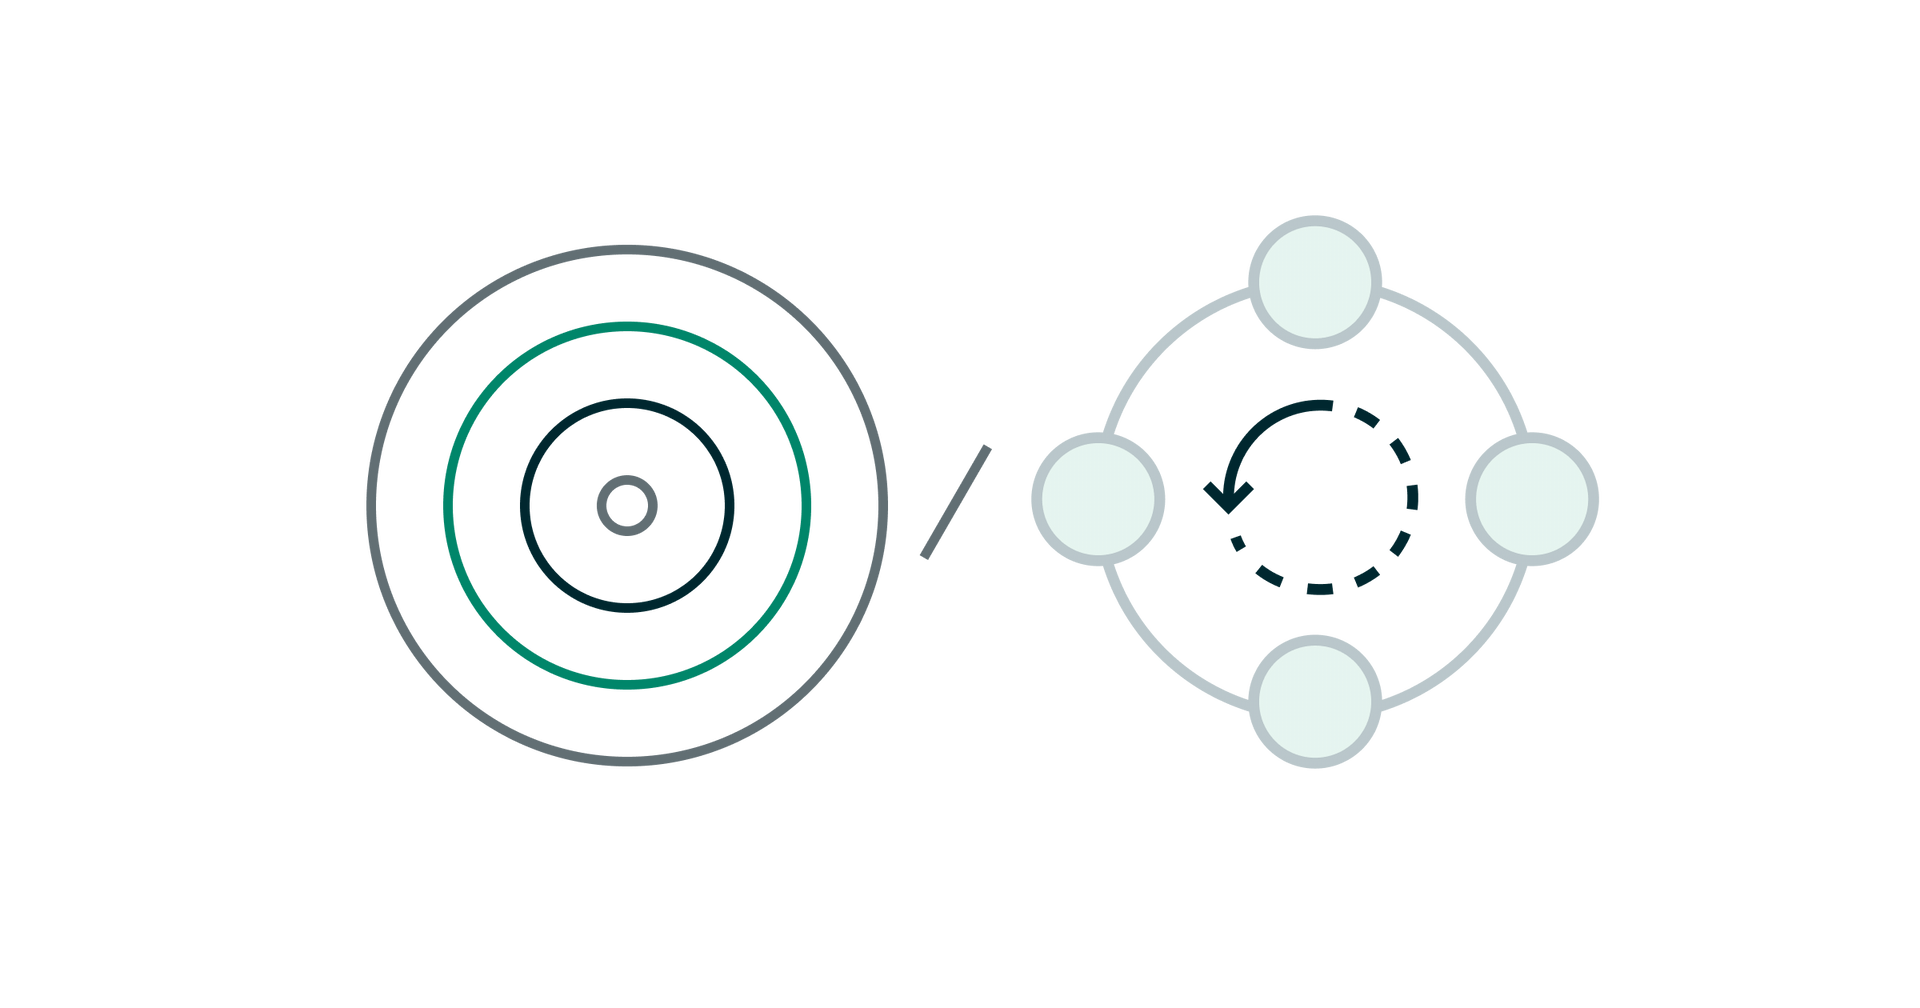 a transparent illustration of two circular diagrams — internally different, one with a circular arrow and the other with embedded circles — representing OKRs vs 4DX